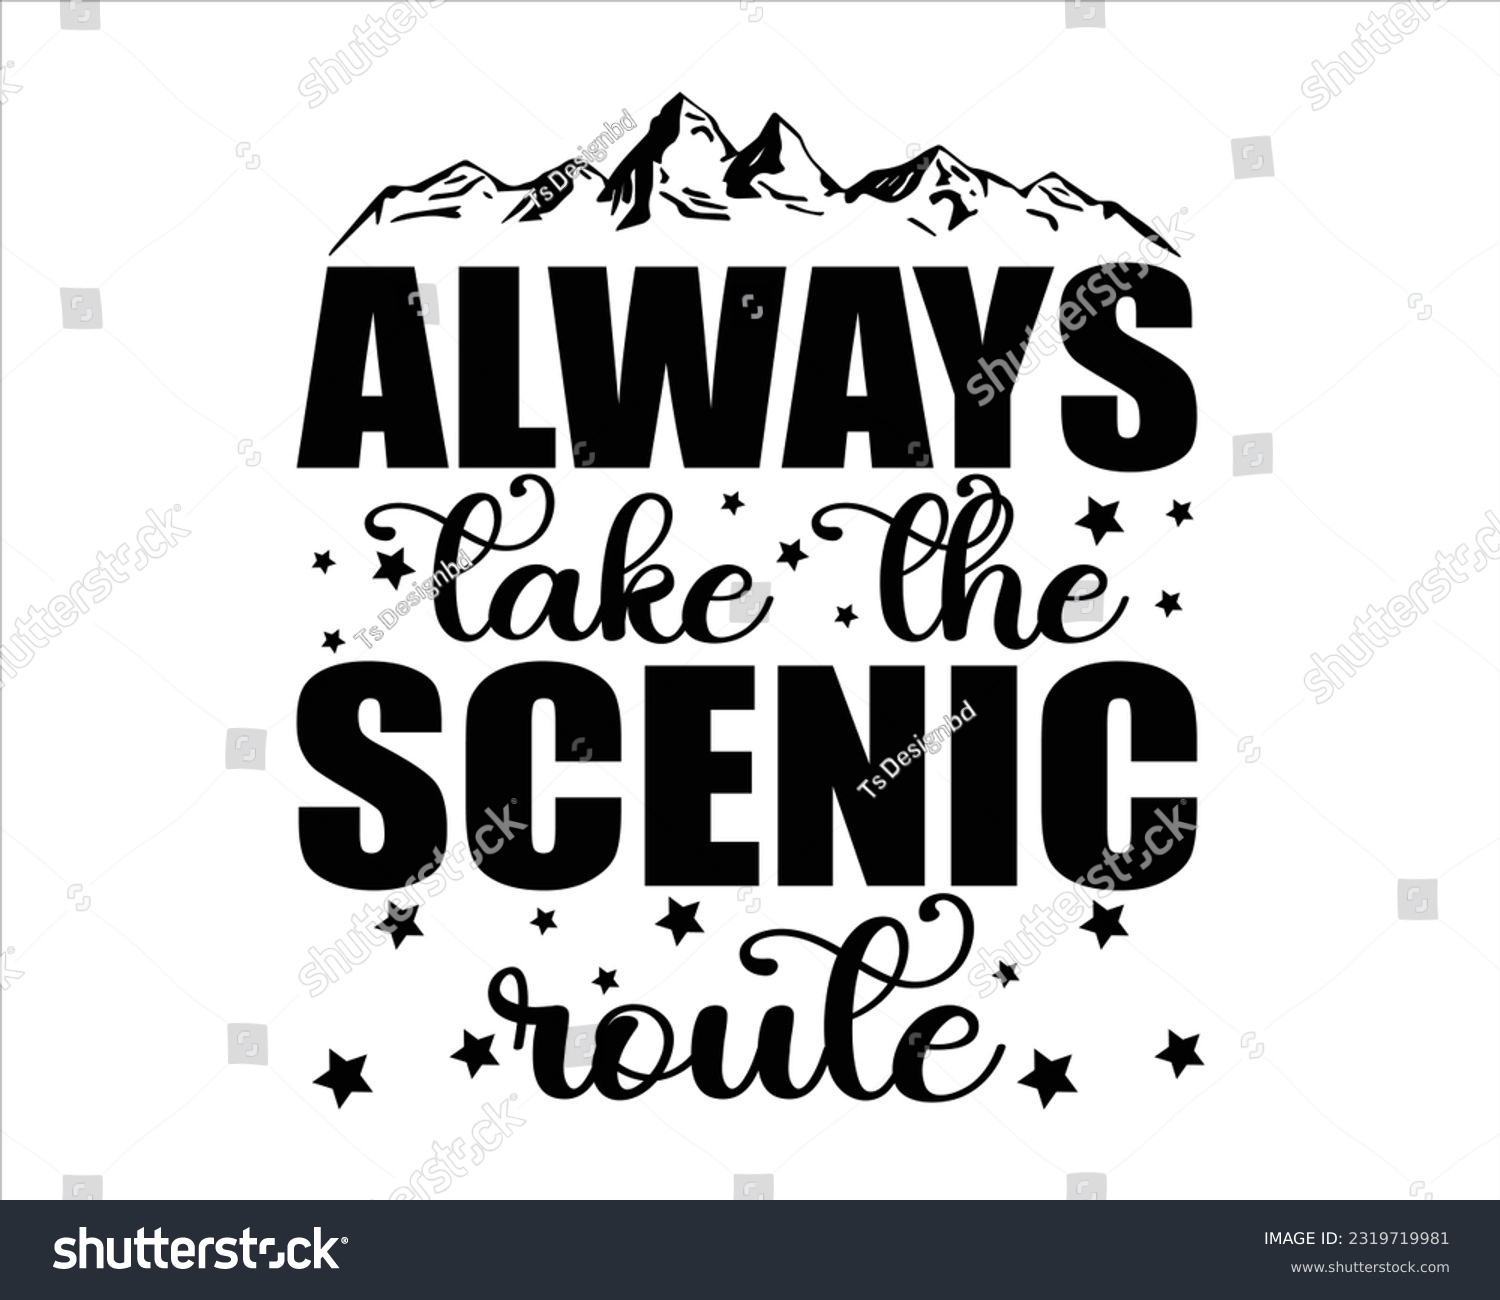 SVG of Always take The scenic Route Svg Design, Hiking Svg Design, Mountain illustration, outdoor adventure ,Outdoor Adventure Inspiring Motivation Quote, camping, hiking svg